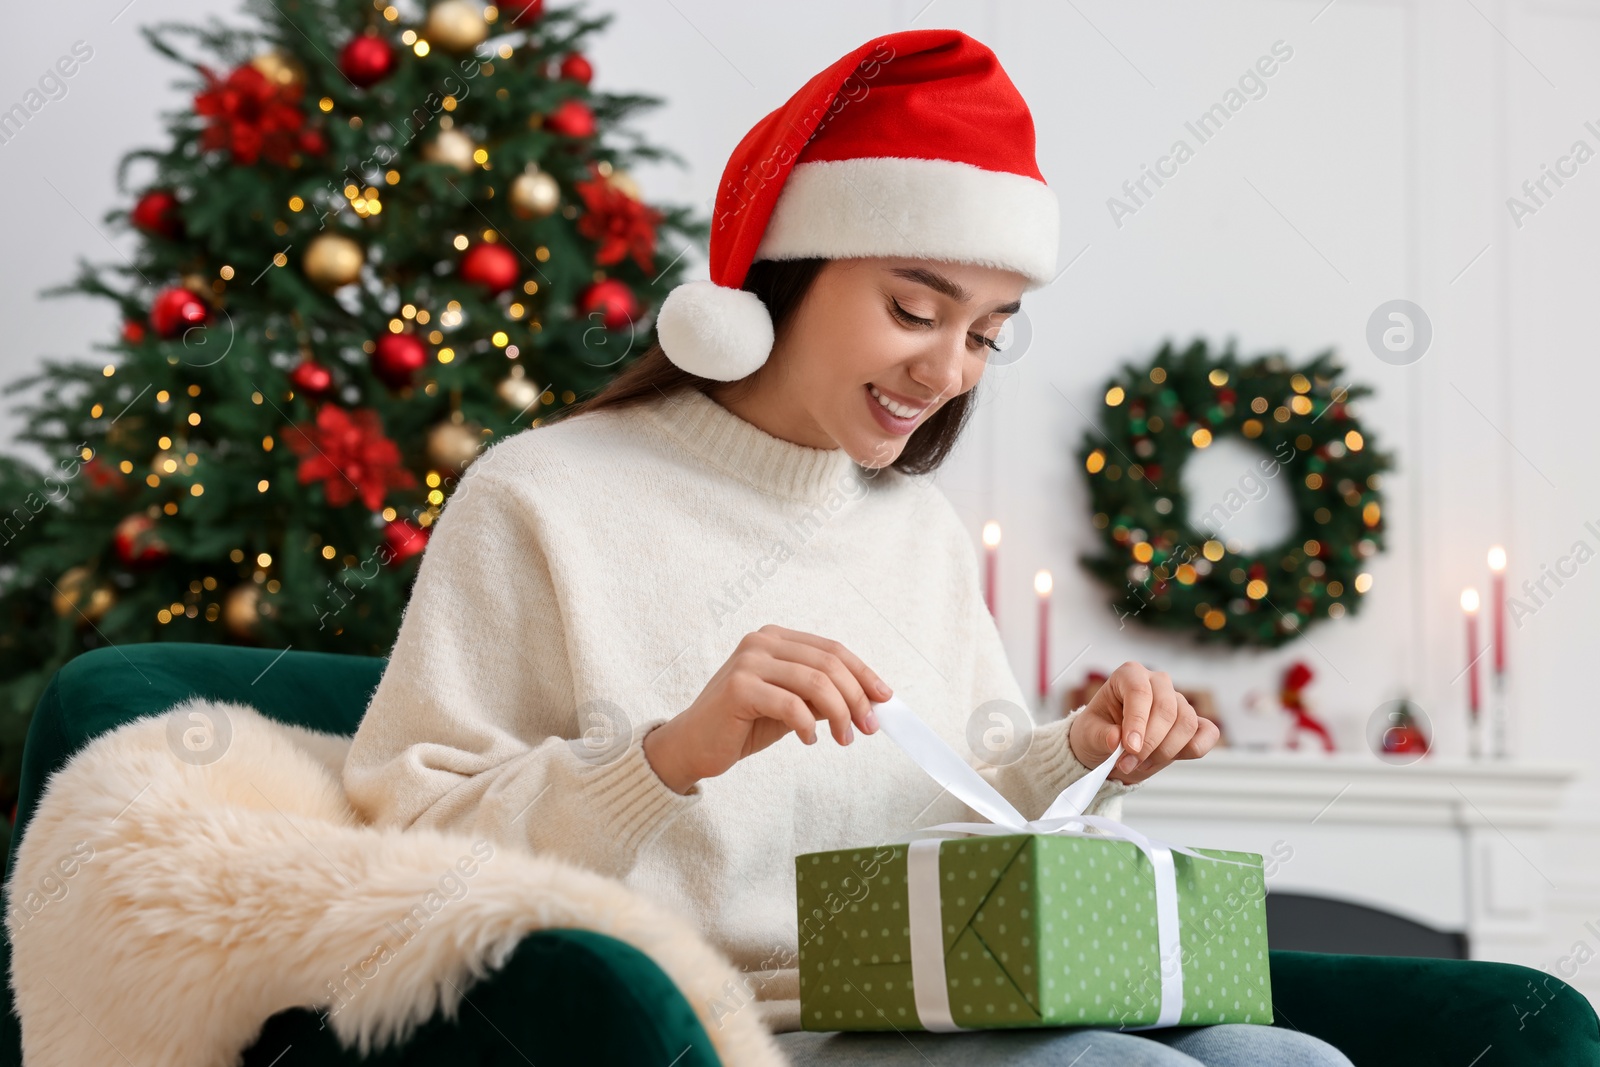 Photo of Happy young woman in Santa hat opening gift box in room decorated for Christmas